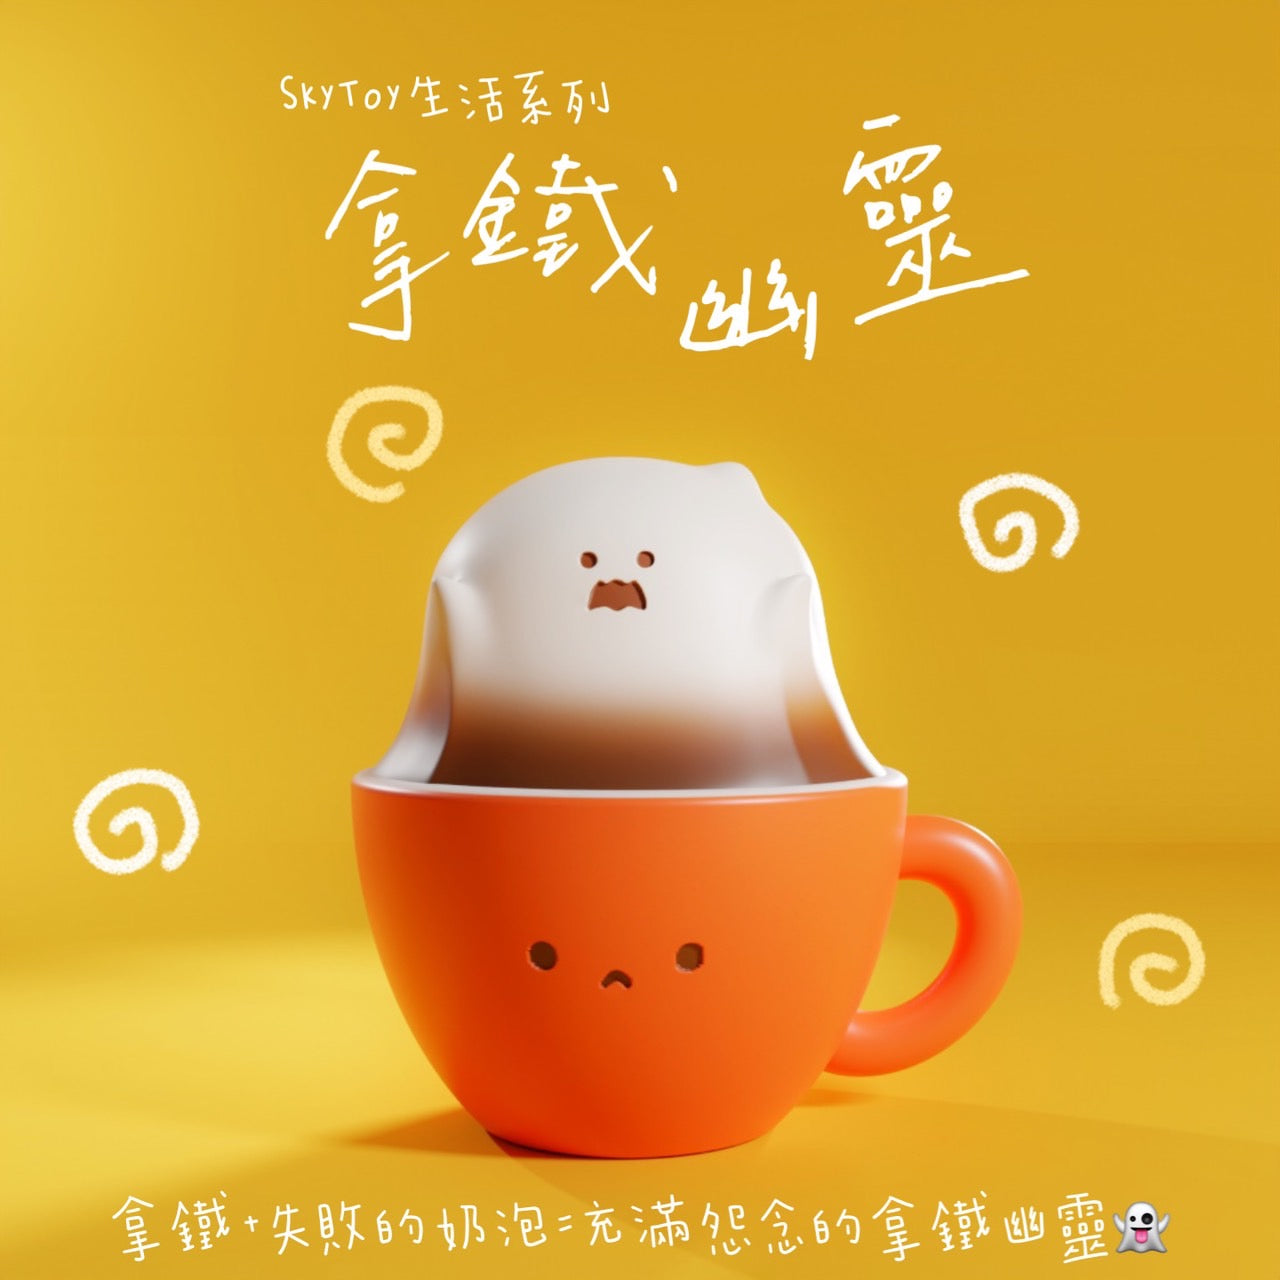 Latte Ghost by Sky Toy in a mug with a cartoon character and a ghost, a close-up of the cup, and a white object with a face.